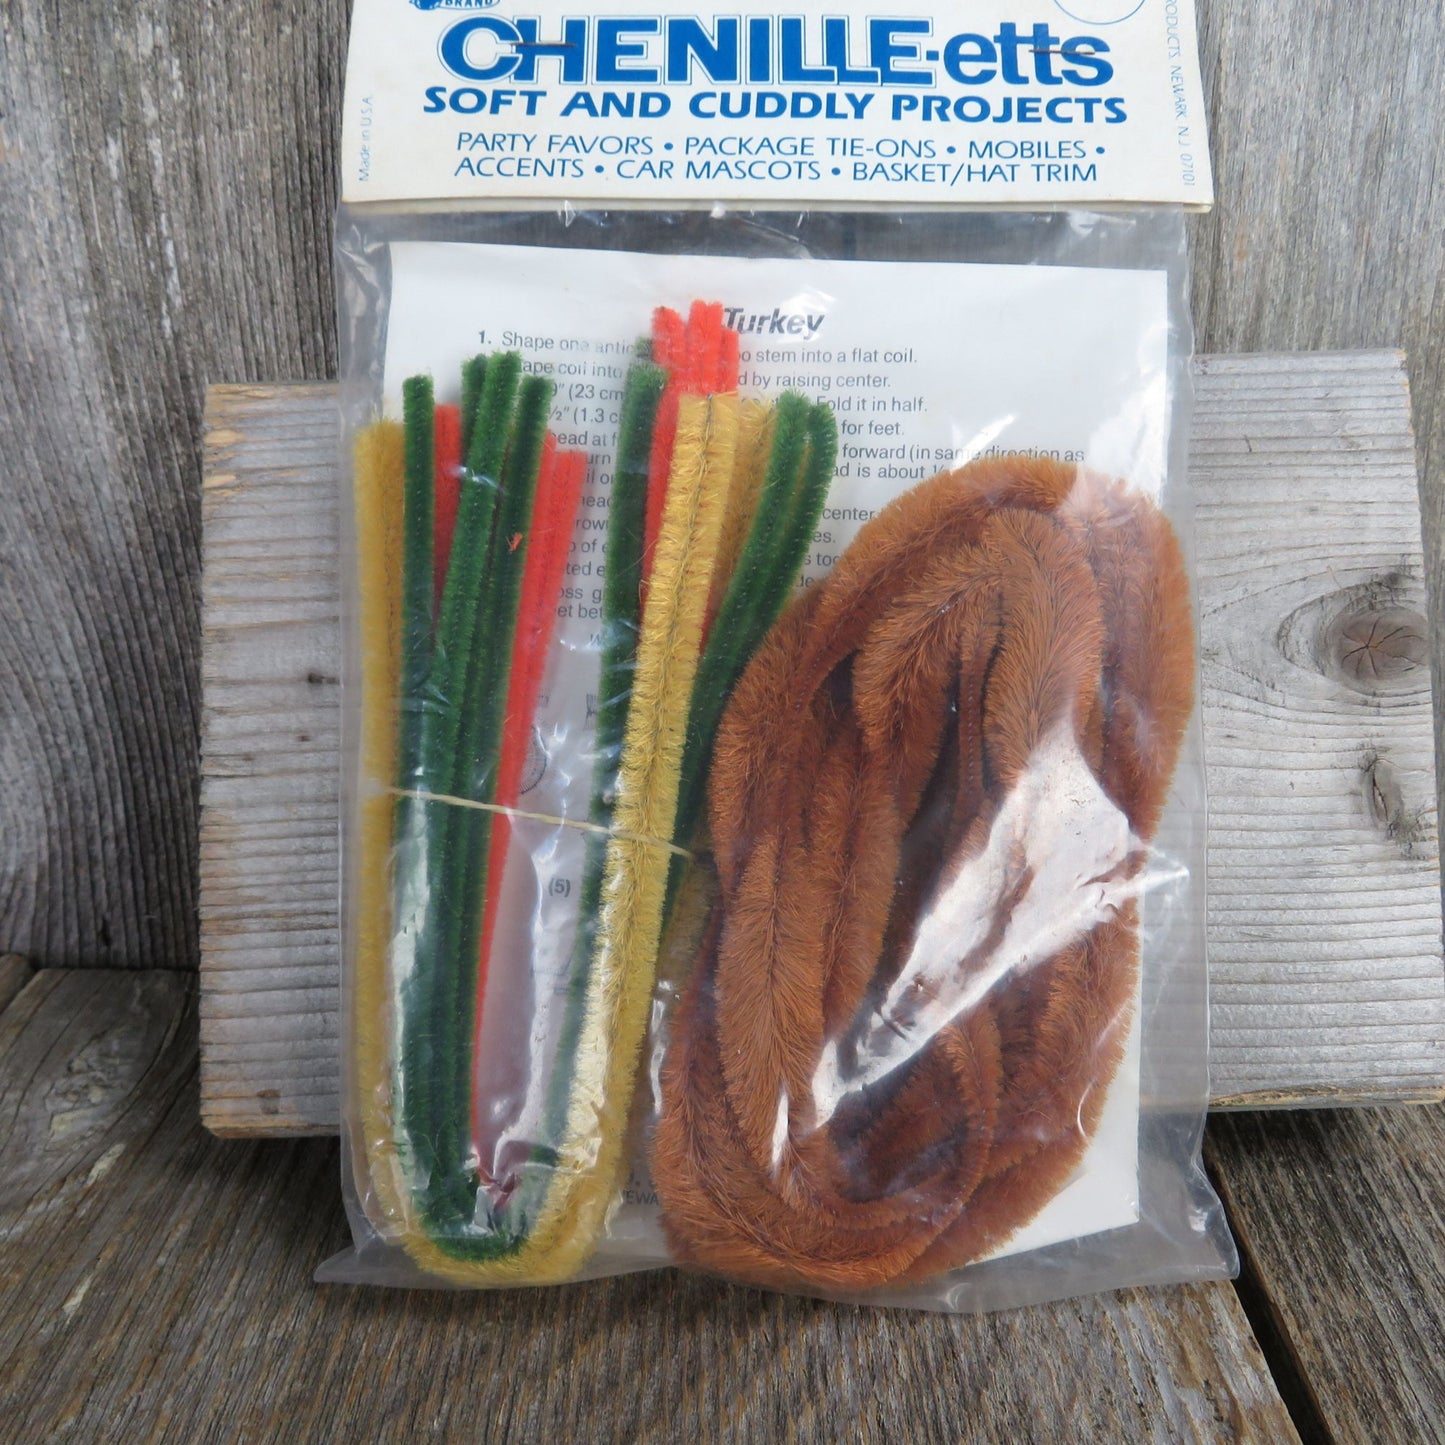 Vintage Thanksgiving Craft Kit Chenille-etts Projects Blue Jay Brand Turkey Pipe Cleaner Chenille Art Kids Activities Made in USA